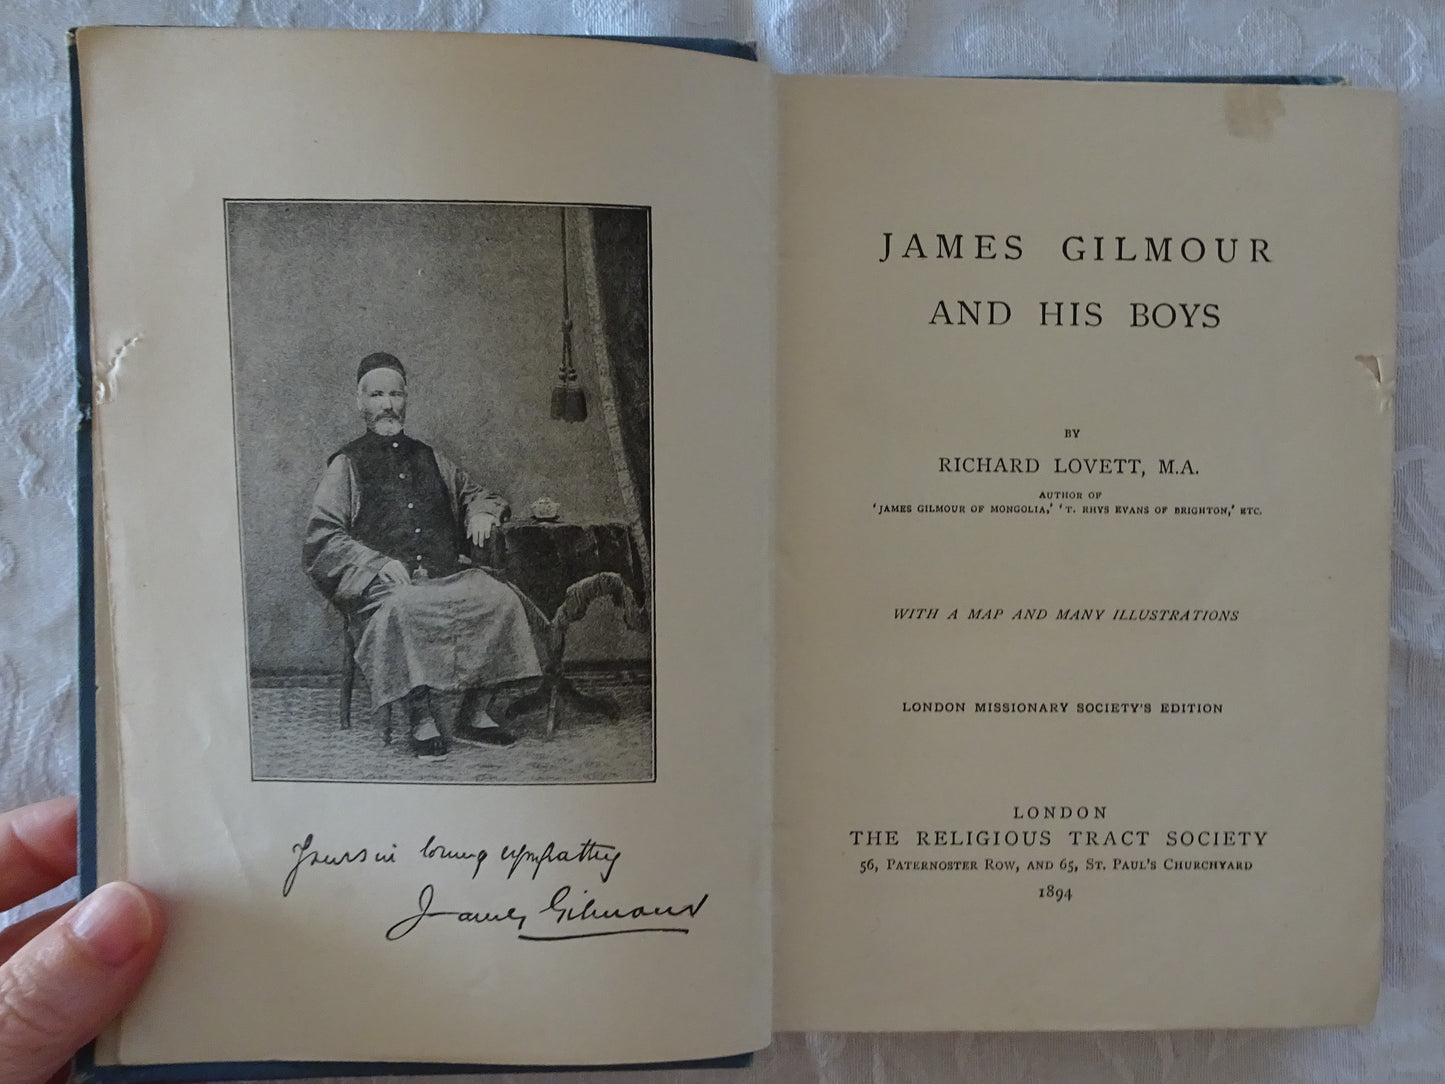 James Gilmour and His Boys by Richard Lovett